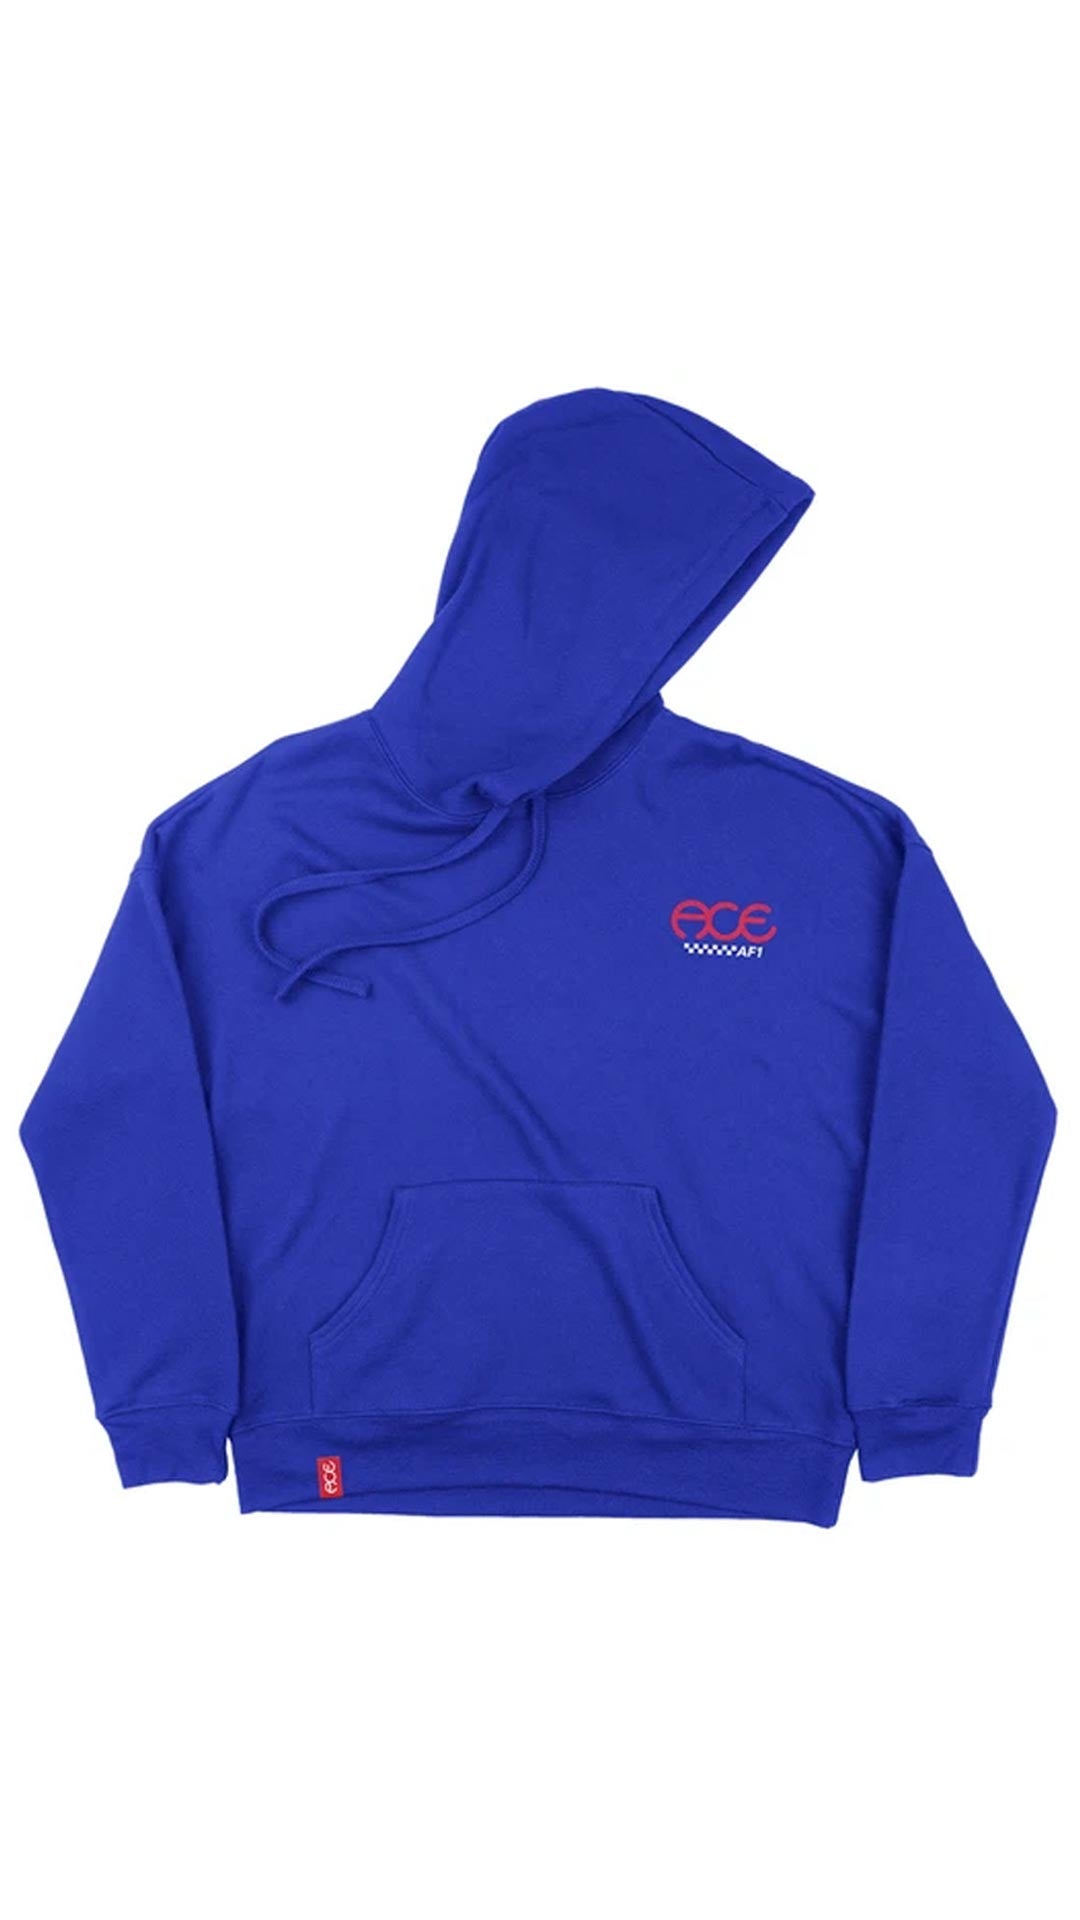 Ace Always First Hoodie Royal Blue - Sudadera Ropa ACE Trucks 